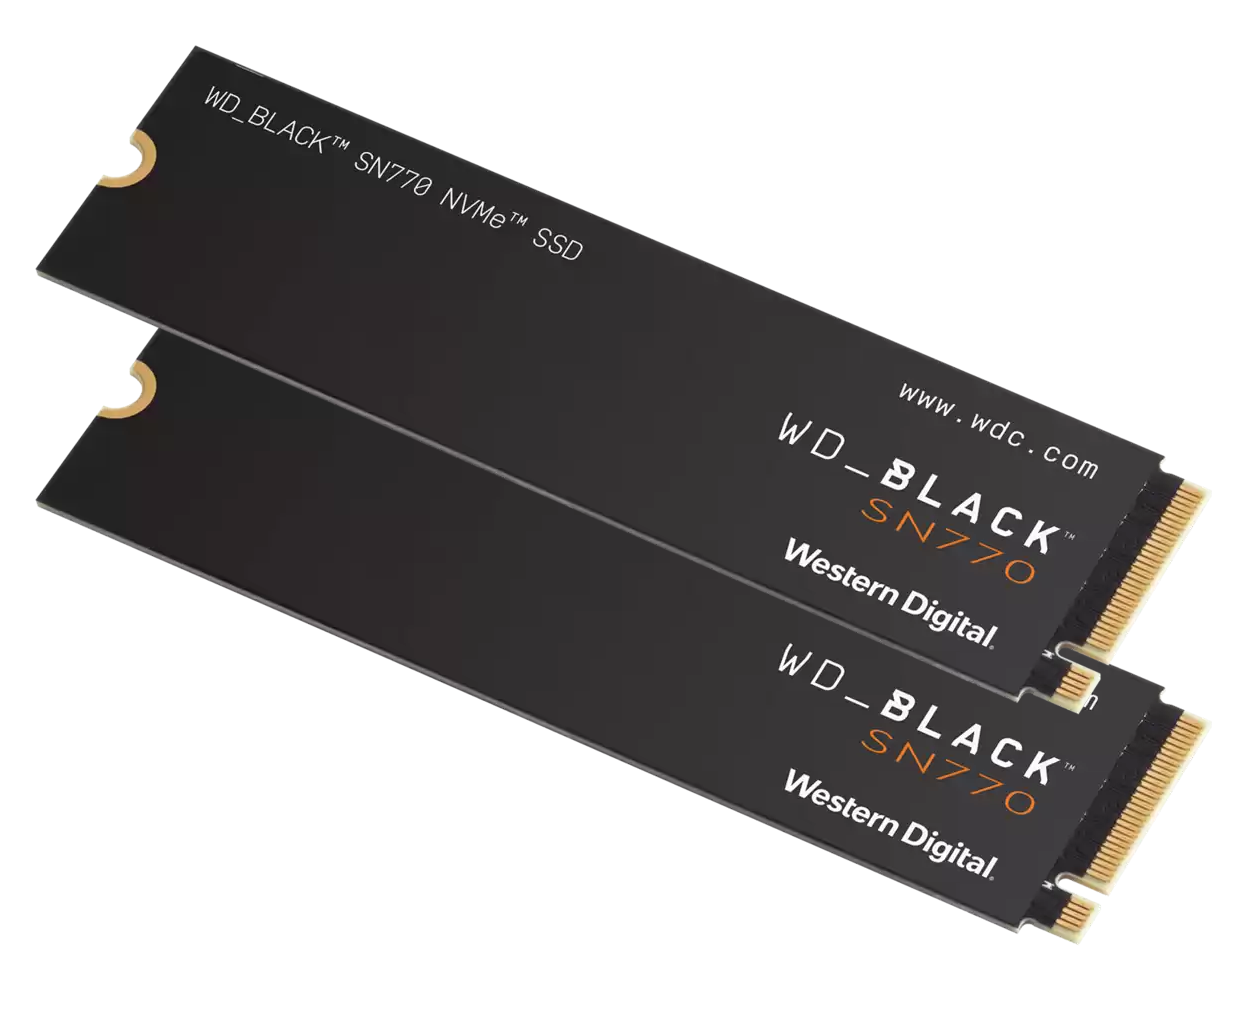 wd-black-sn770-nvme-ssd-angled.png.wdthumb.1280.1280.png__PID:d09a5405-5196-481d-9ce3-526b2c950090